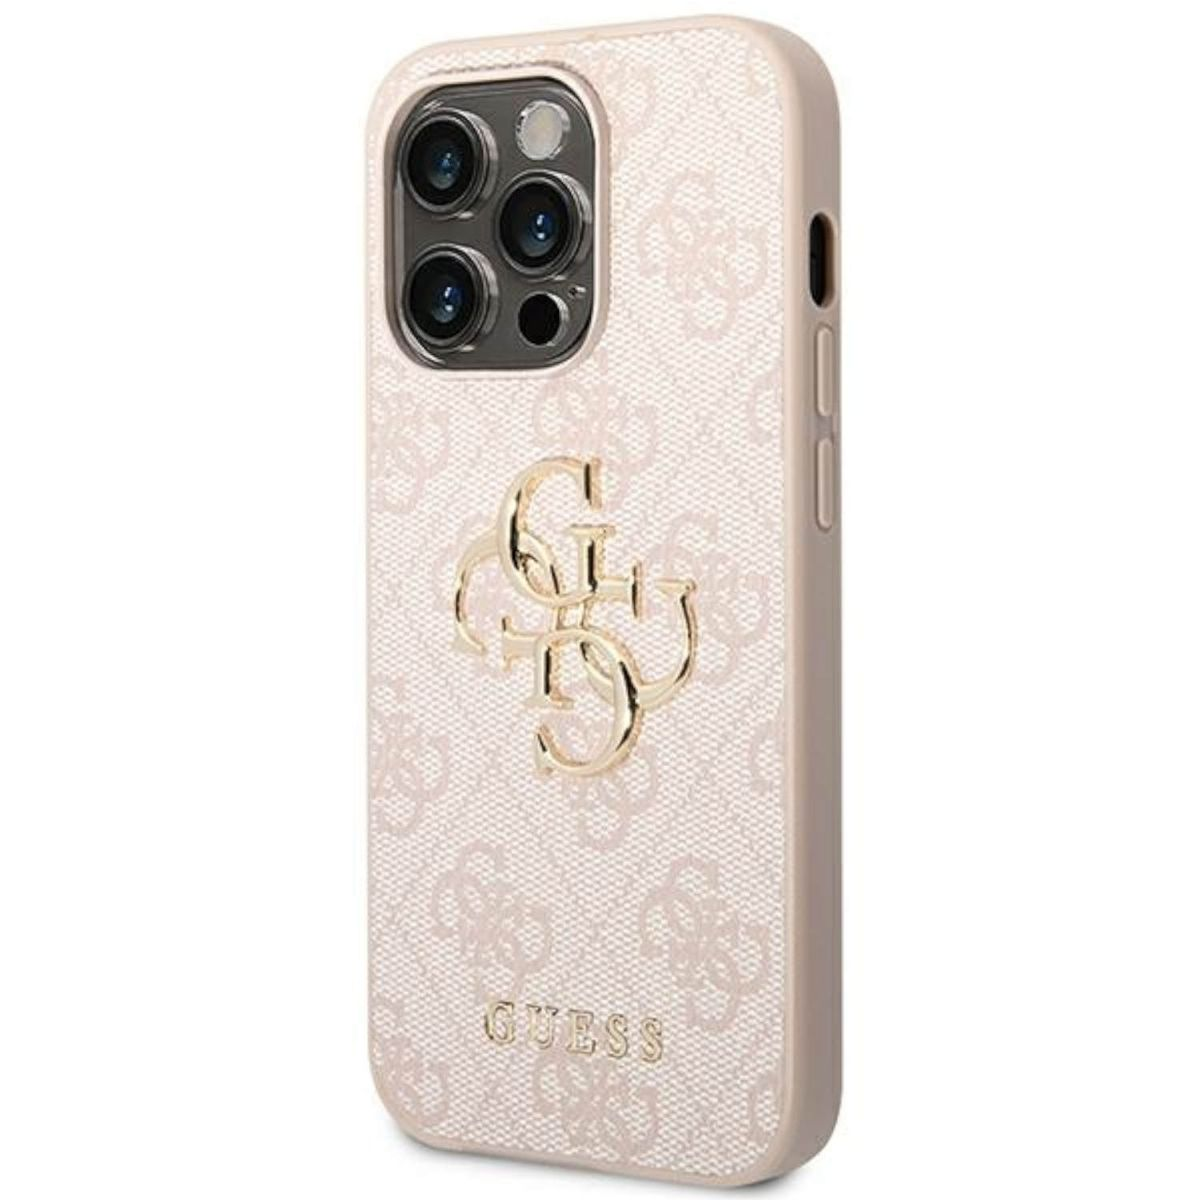 Pro, iPhone iPhone 4G (Pink), Logo GUESS Case Metal 14 Pro Keine Backcover, Apple, Big 14 Angabe